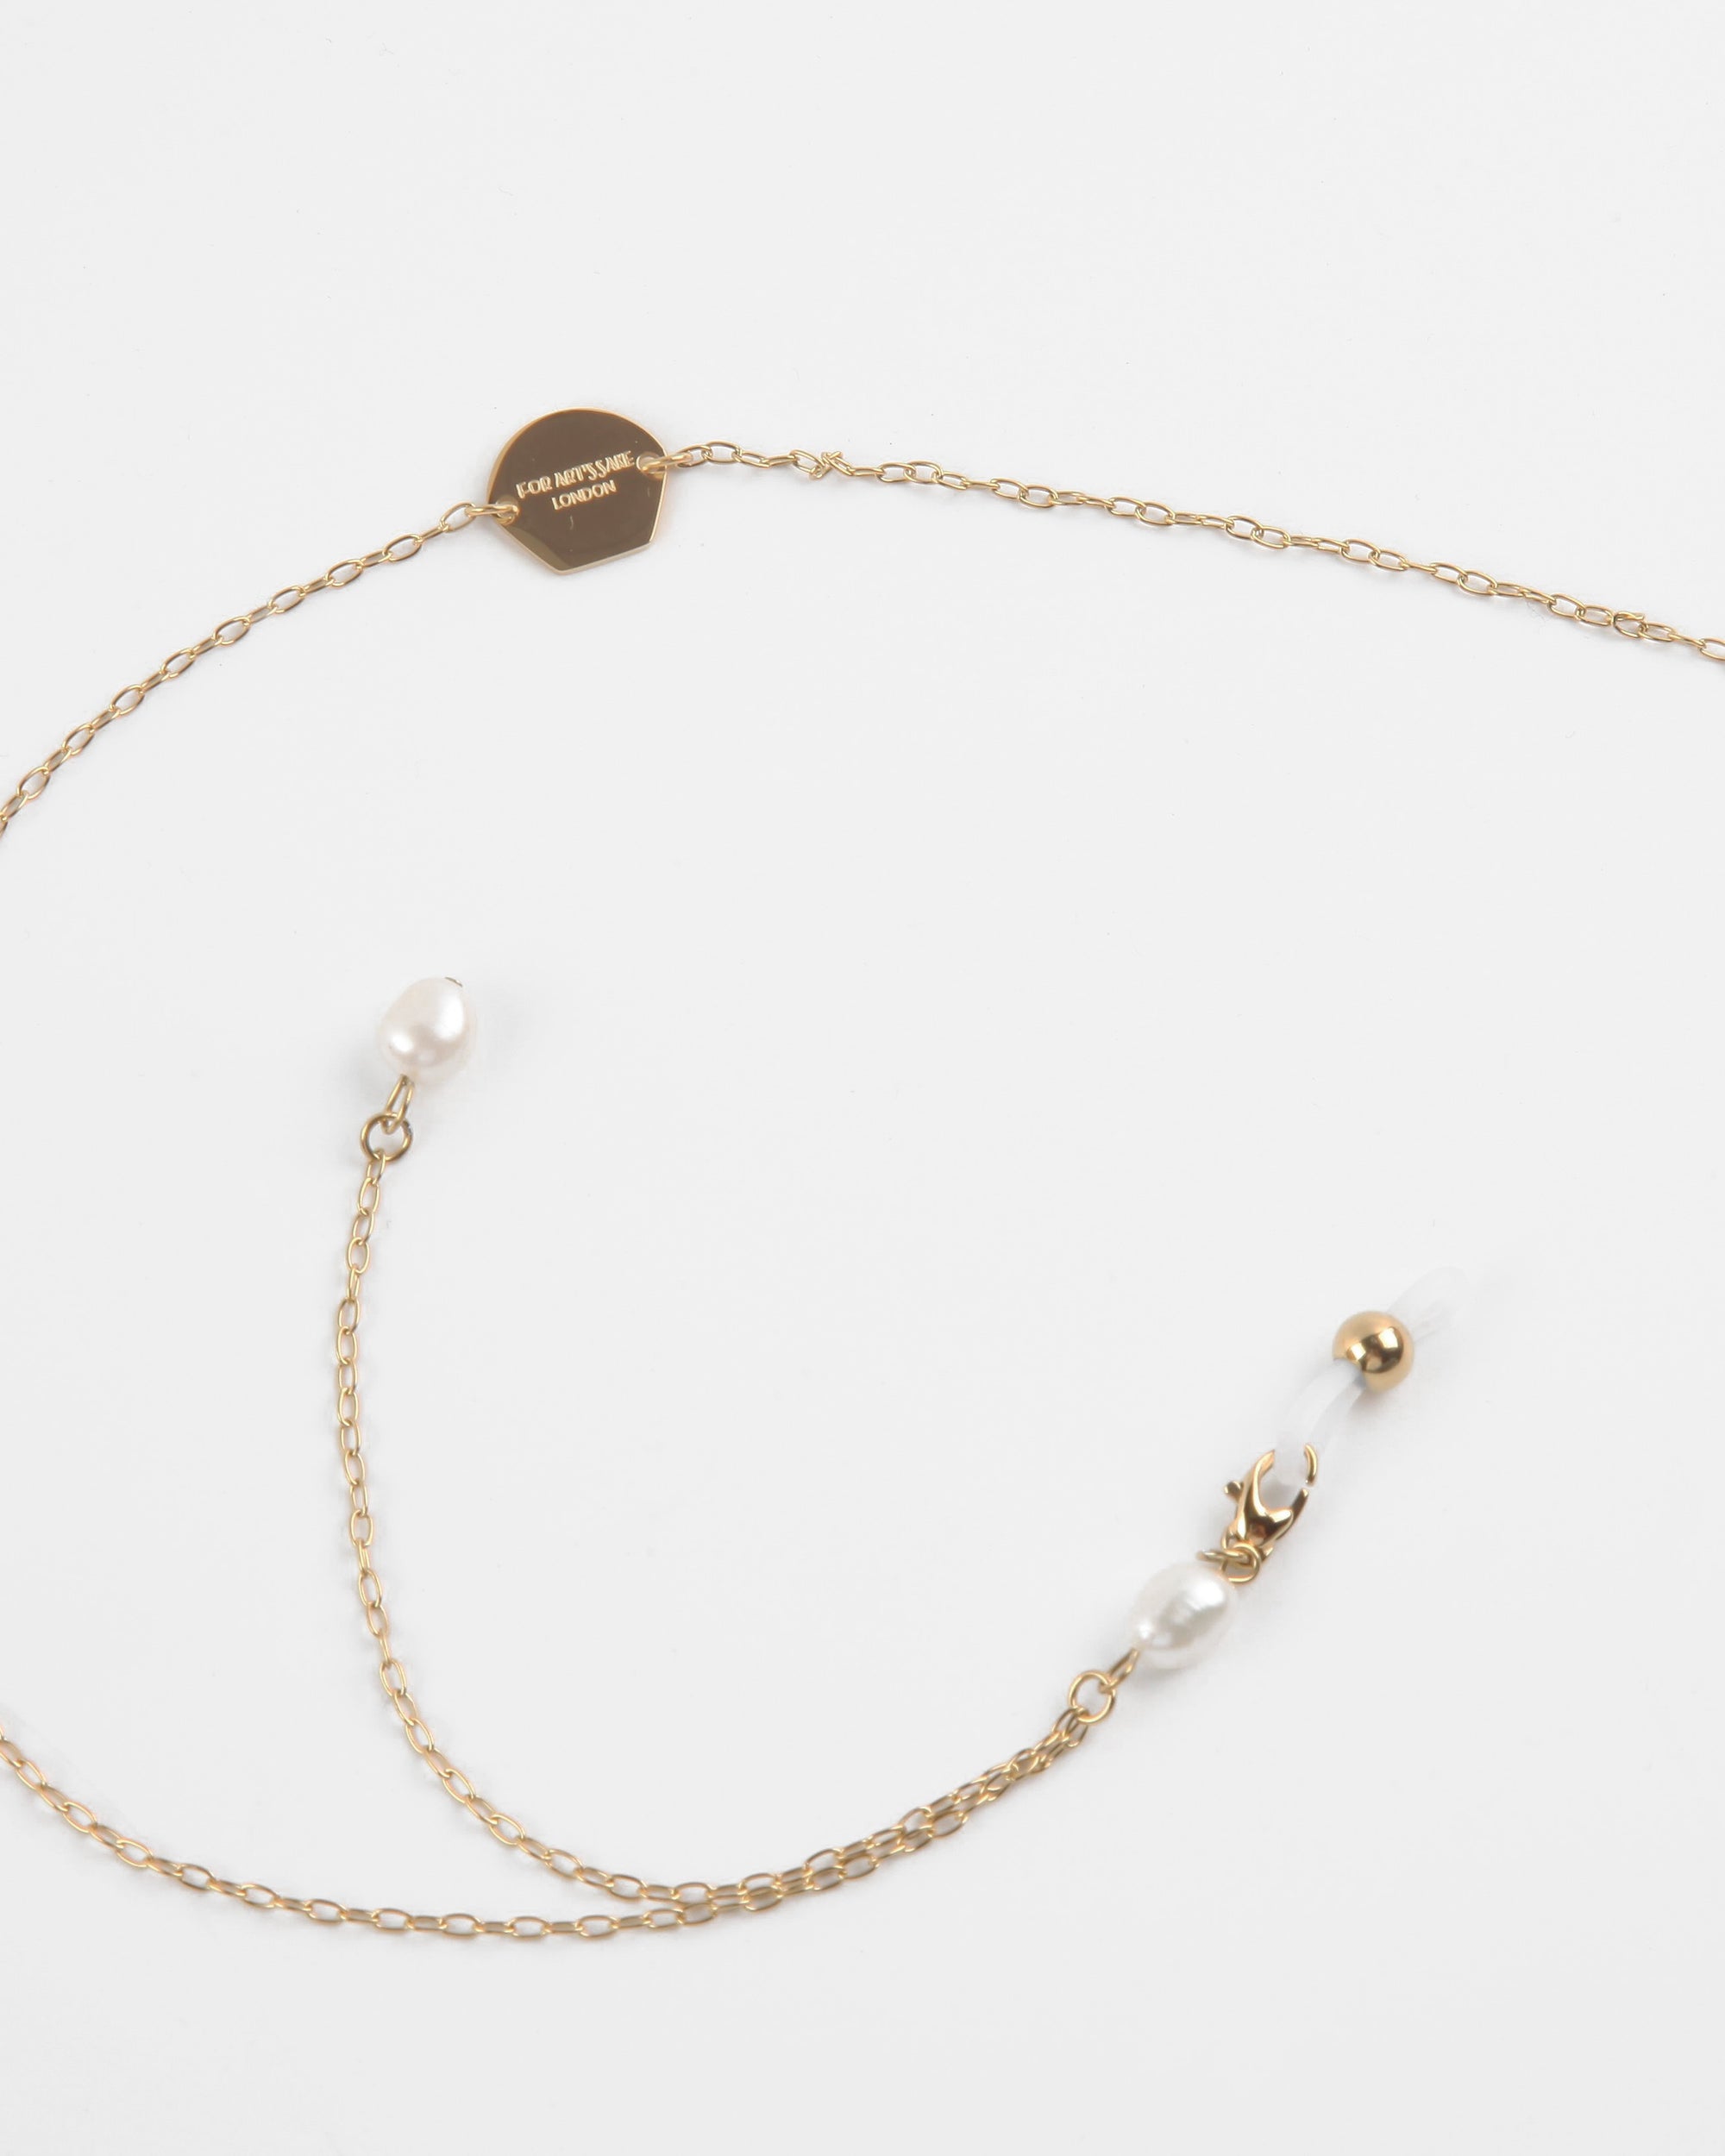 A delicate, lightweight chain in 18K gold features a small round tag inscribed with "Le Pompadour Limited" and is adorned with two freshwater pearl charms. The chain ends with a clasp for fastening, all set against a plain white background. Introducing the **Victoria Glasses Chain by For Art's Sake®**.